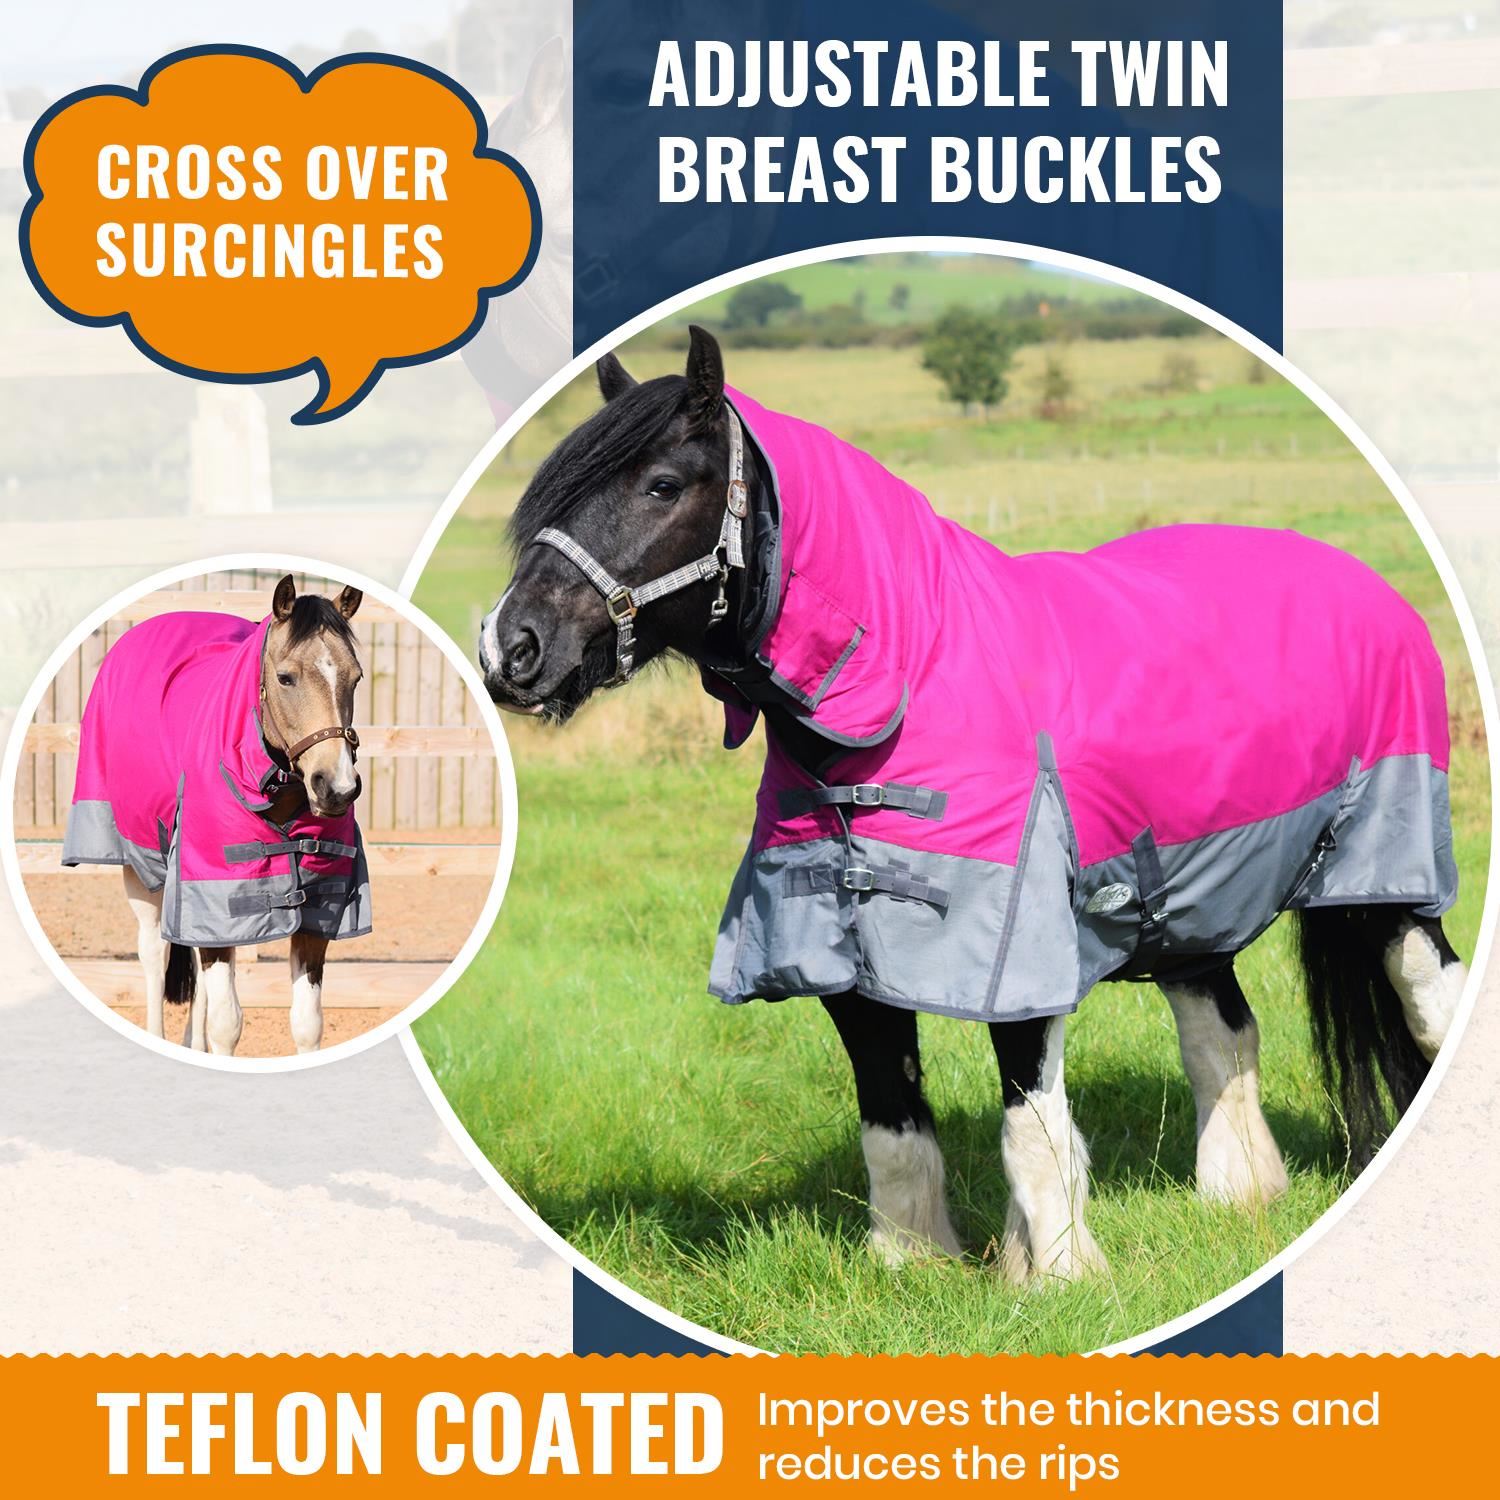 1200D Outdoor Winter Turnout Horse Rugs 50G Fill COMBO Neck Raspberry/Grey 5'3-6'9